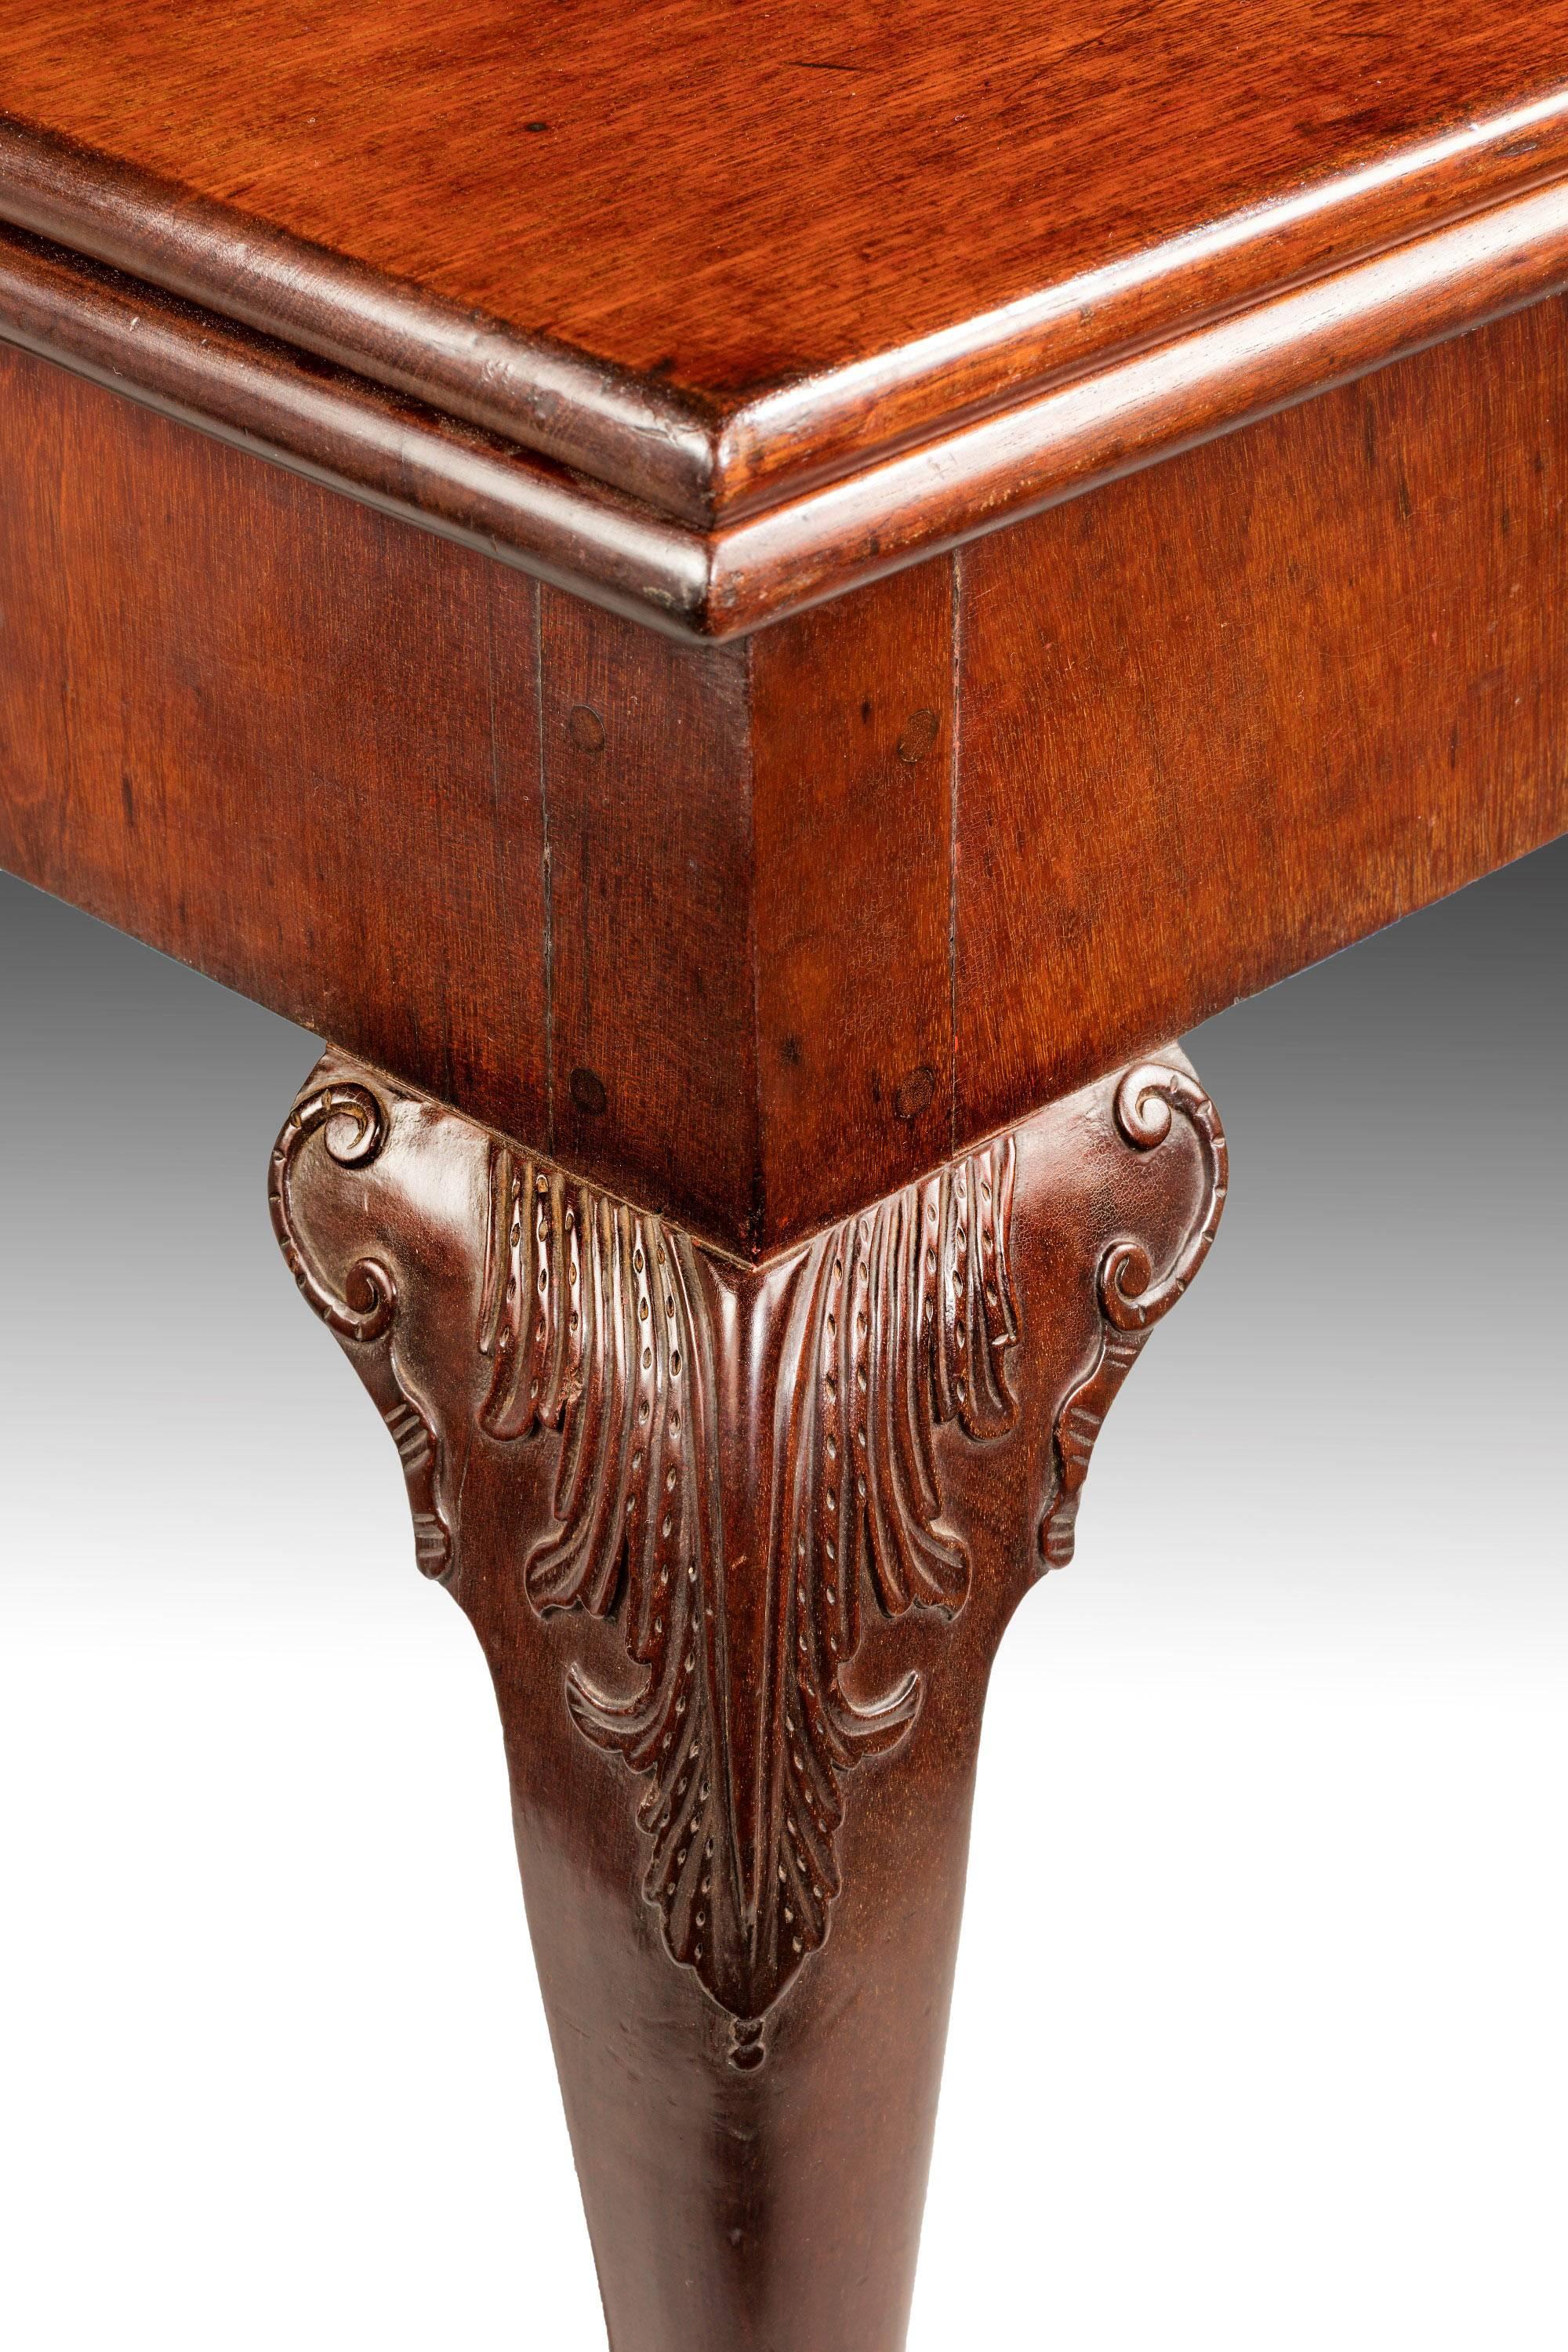 Chippendale Period Mahogany Card Table In Excellent Condition In Peterborough, Northamptonshire